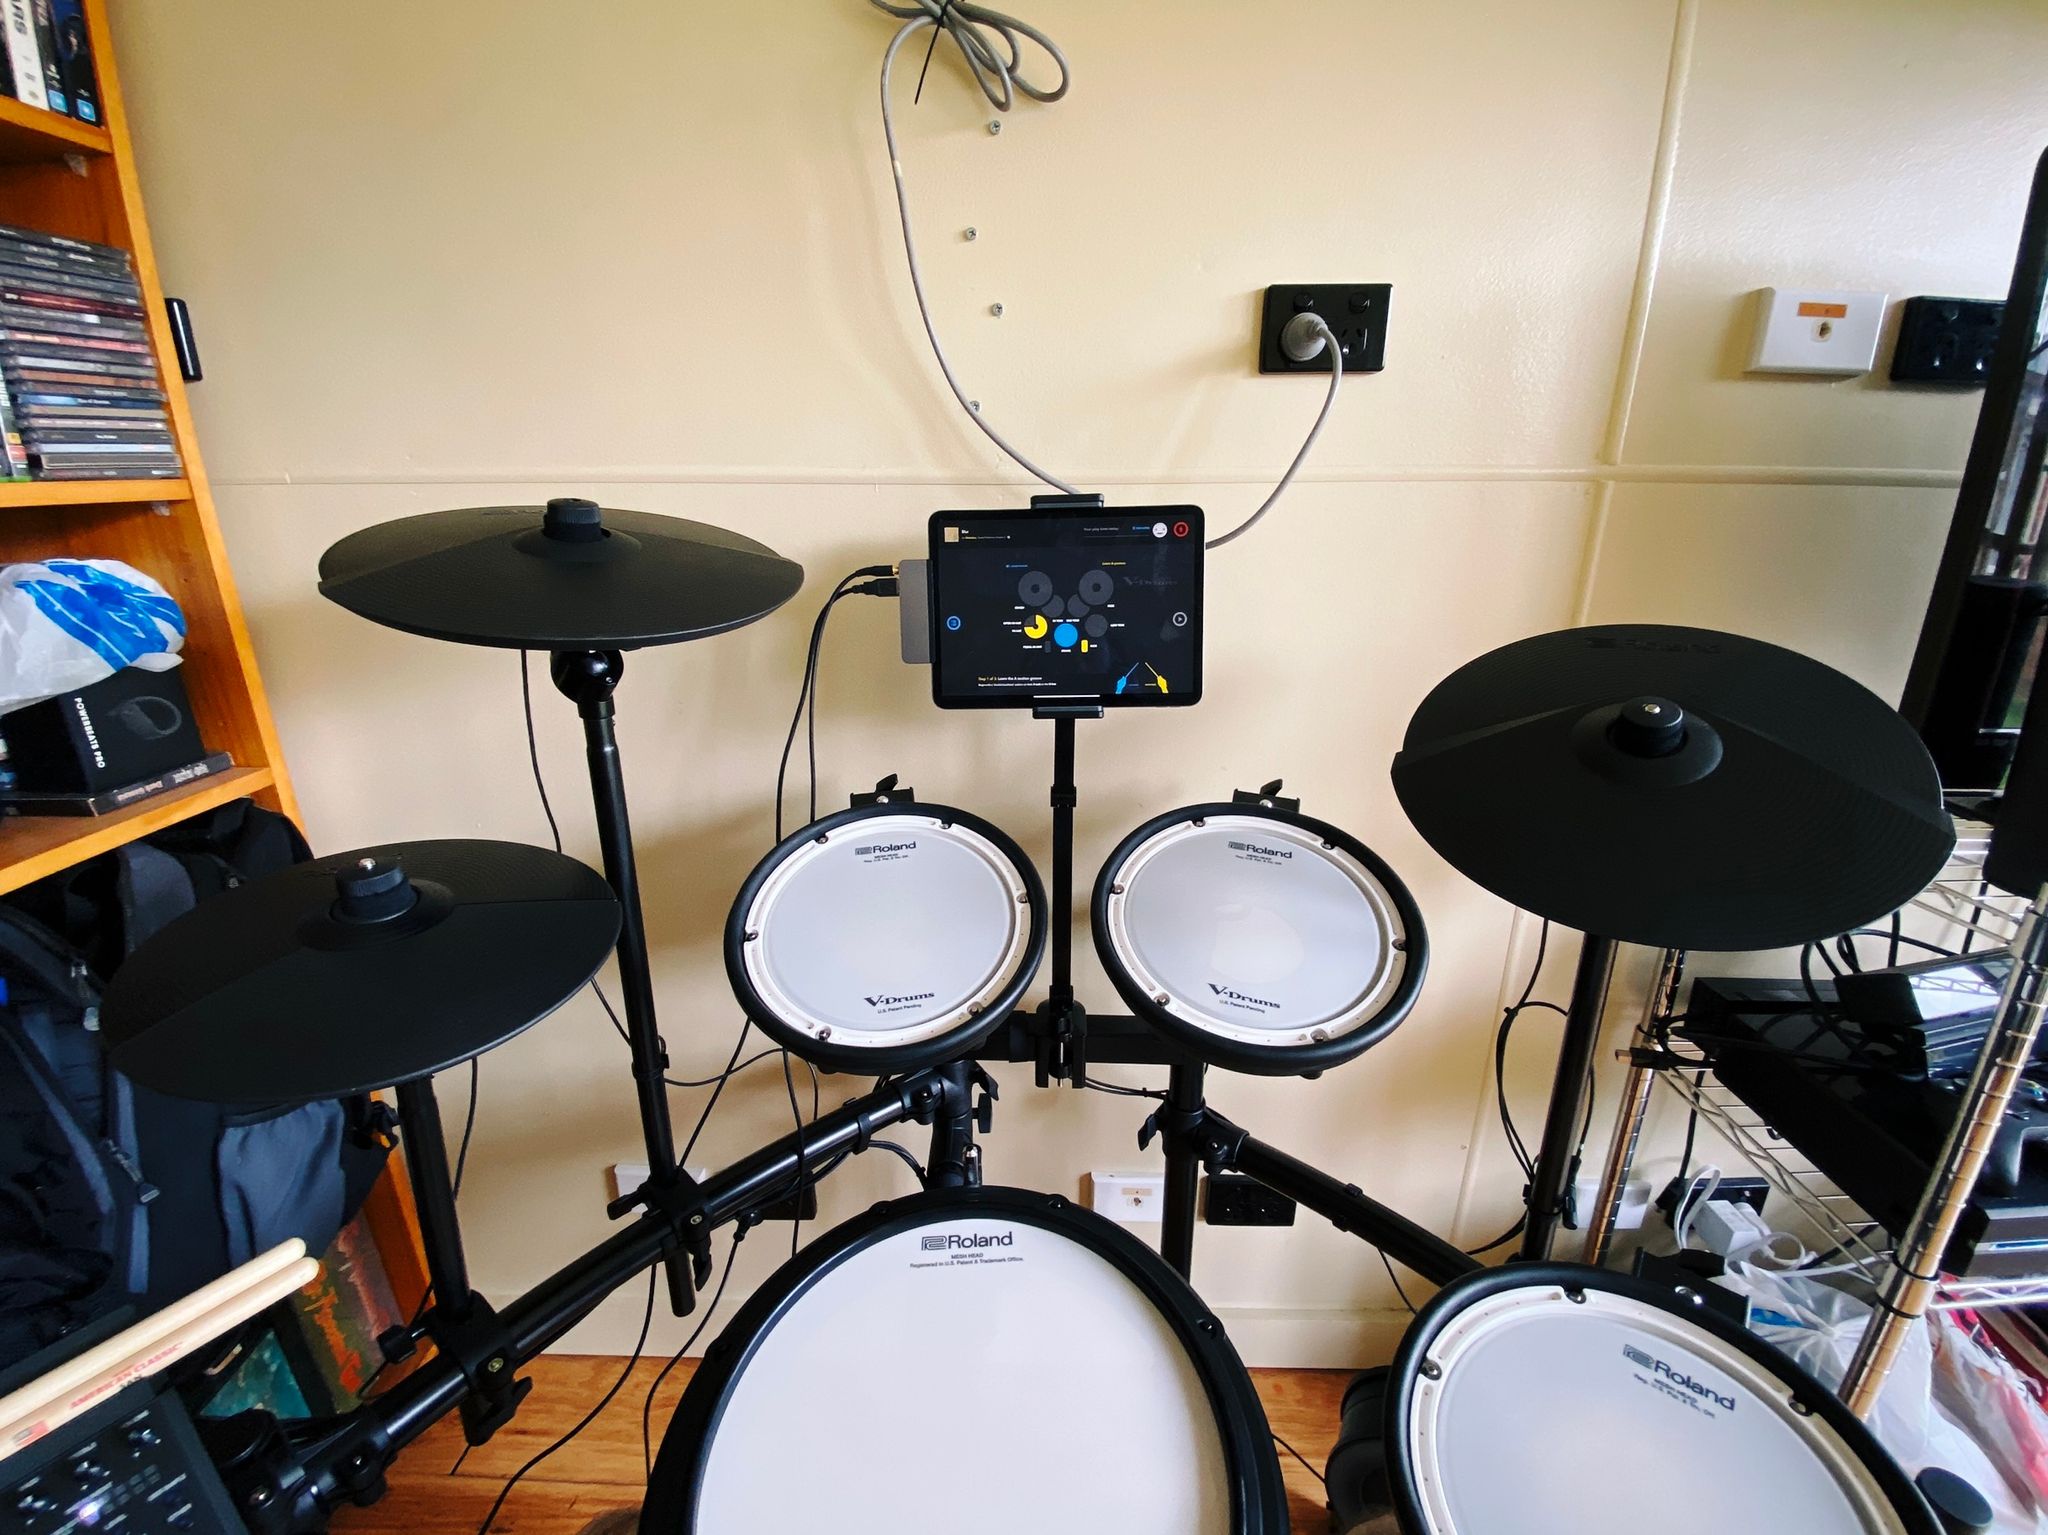 A photo of an electronic drumkit with a metal arm attached to the bar in the middle that's protruding up behind the two middle toms, with an iPad being held at the top of it and the "Melodics" app on screen.